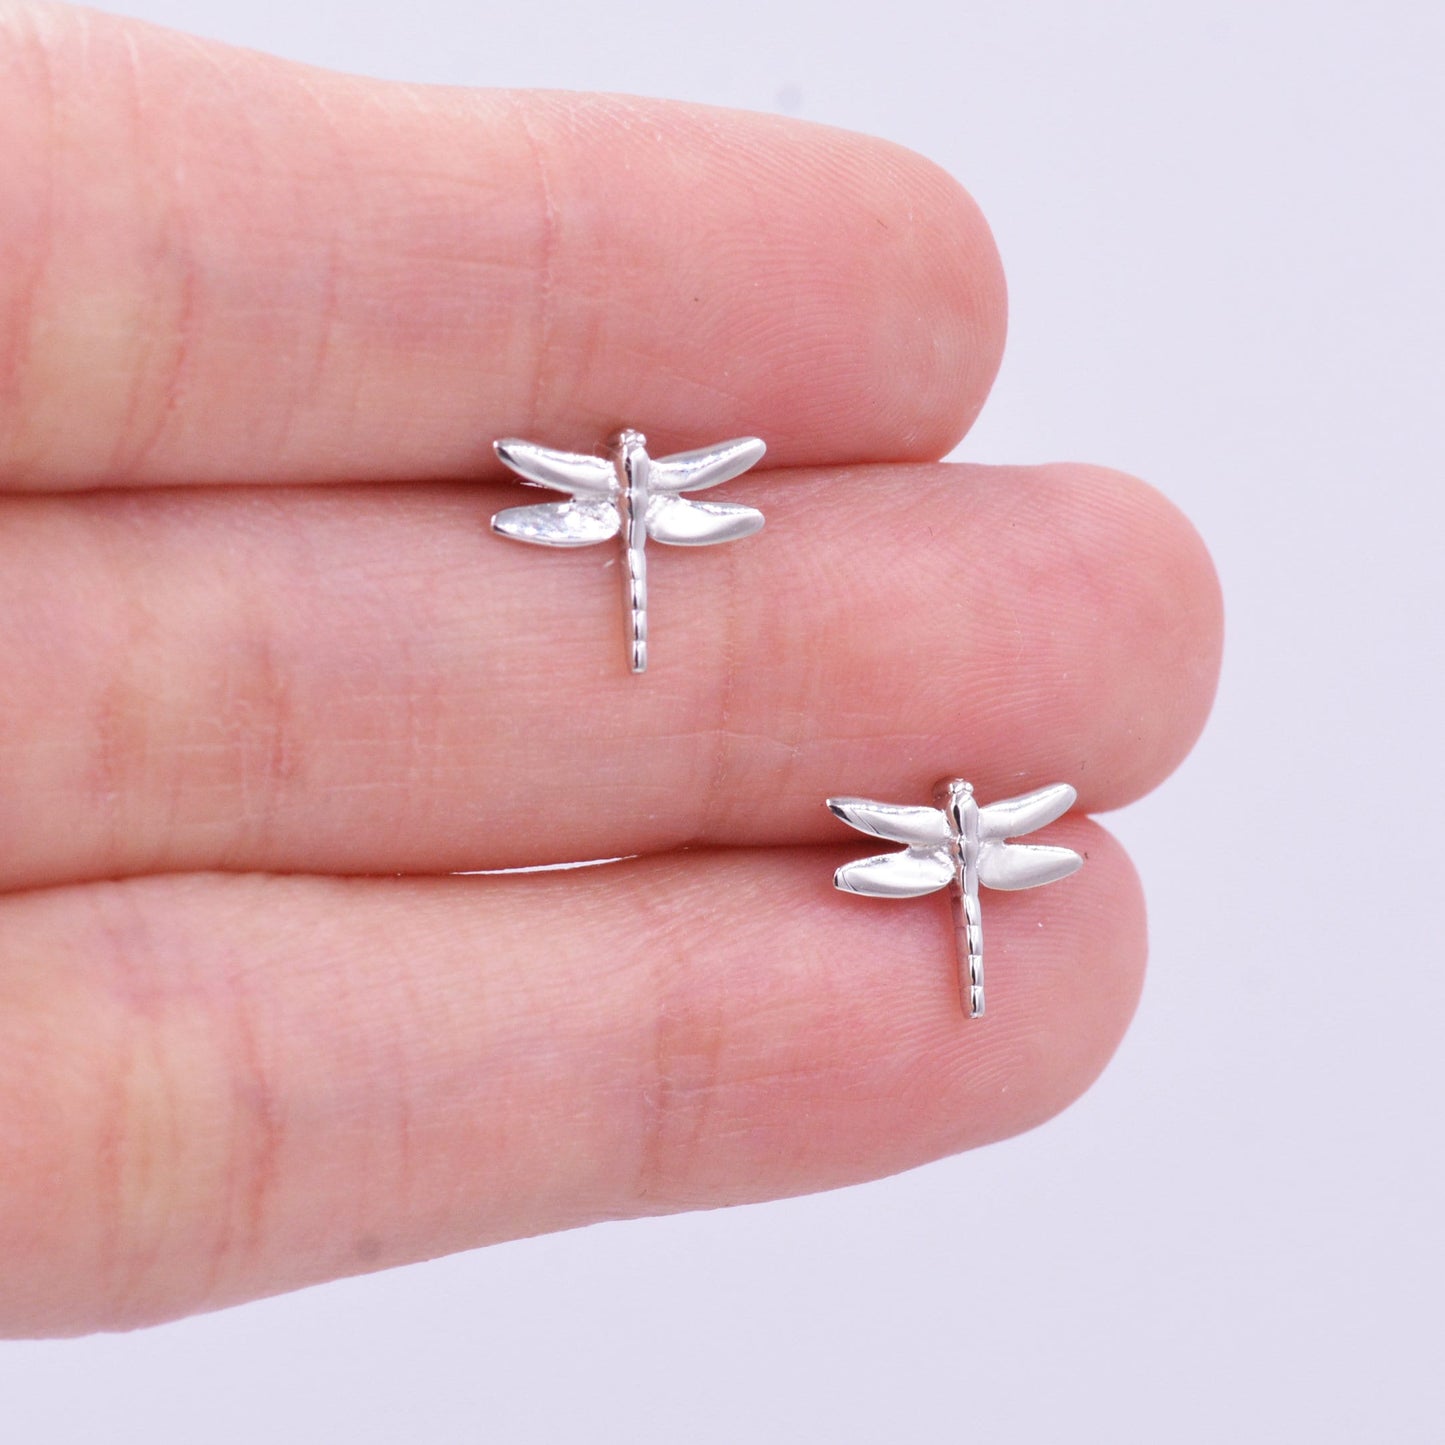 Dragonfly Stud Earrings in Sterling Silver,  Cute Fun Quirky Animal Jewellery, Jewelry Gift for Her, Animal Lover,  Nature Inspired